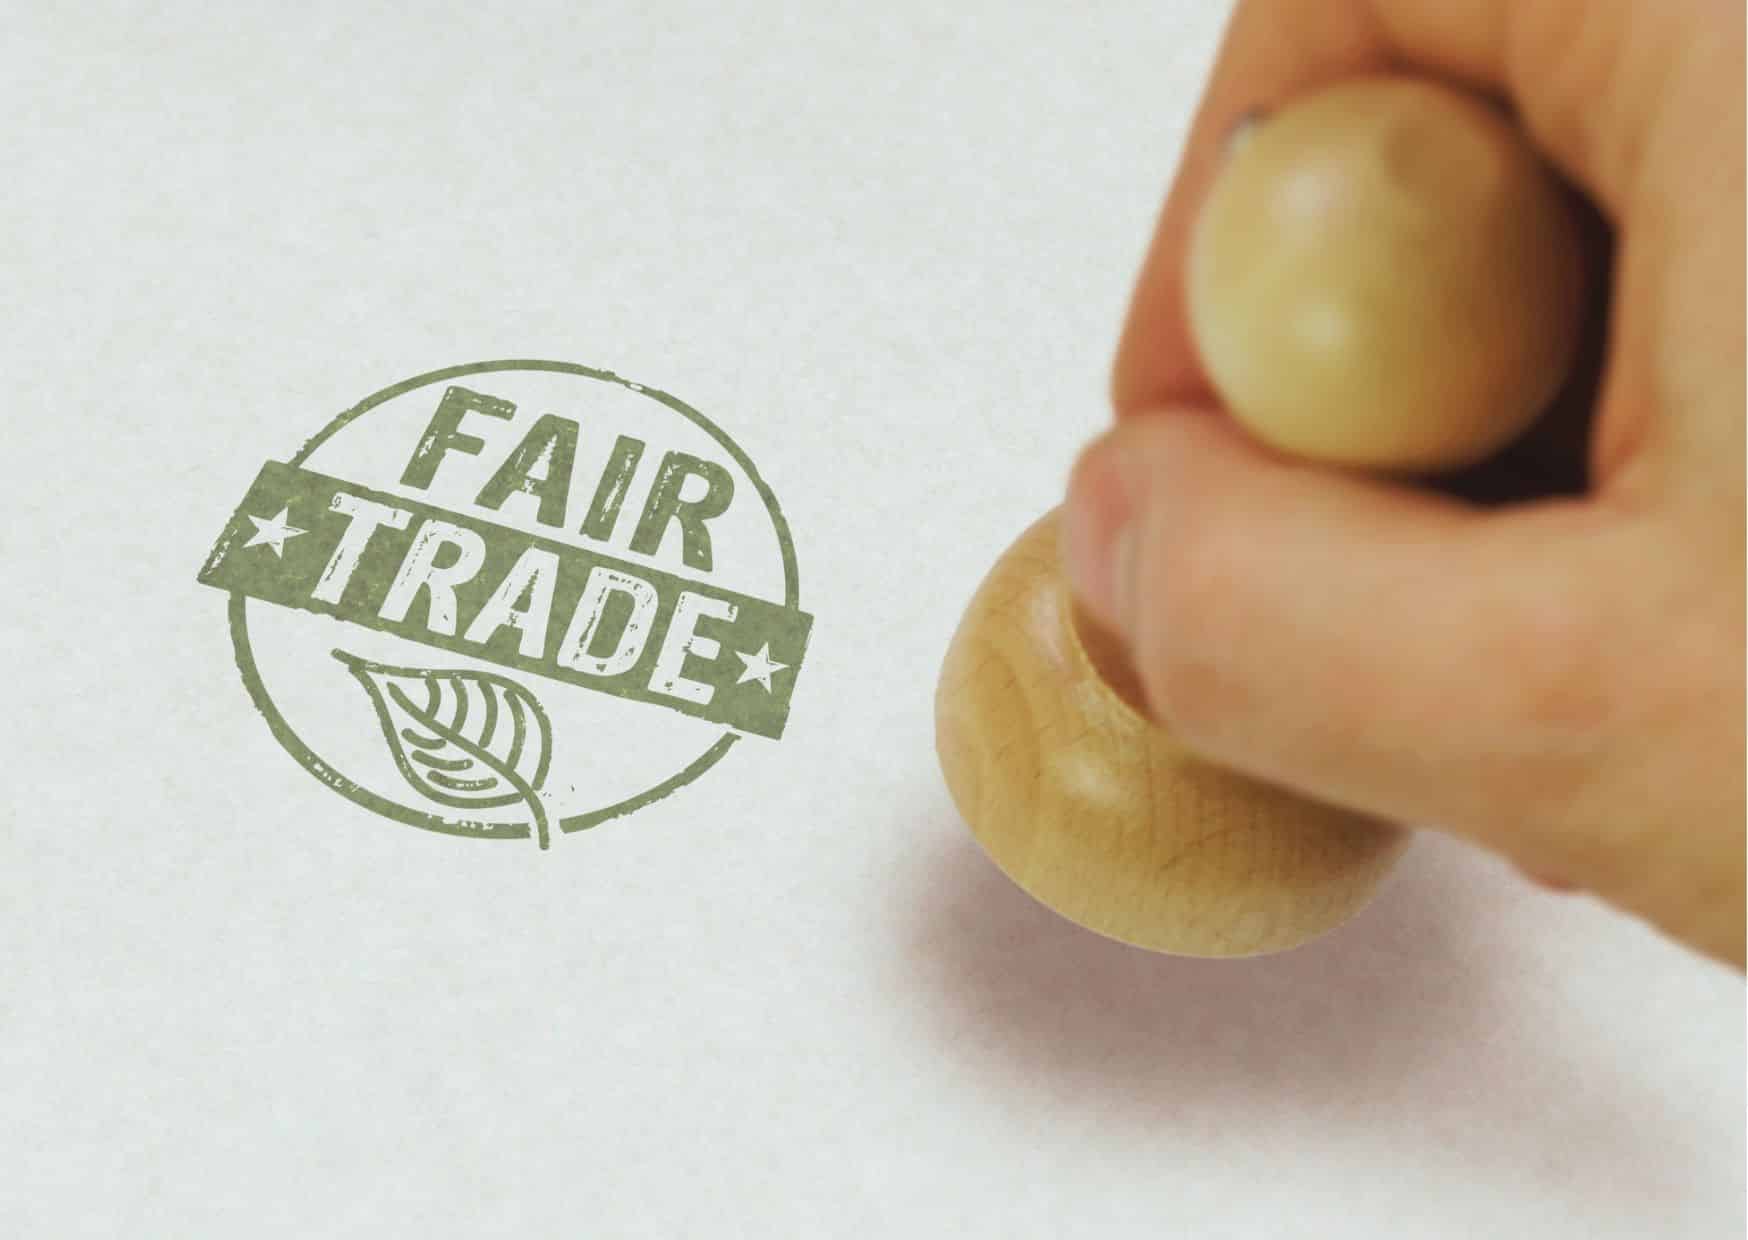 Fair Trade Marketing: What Is It and Why Should You Care?